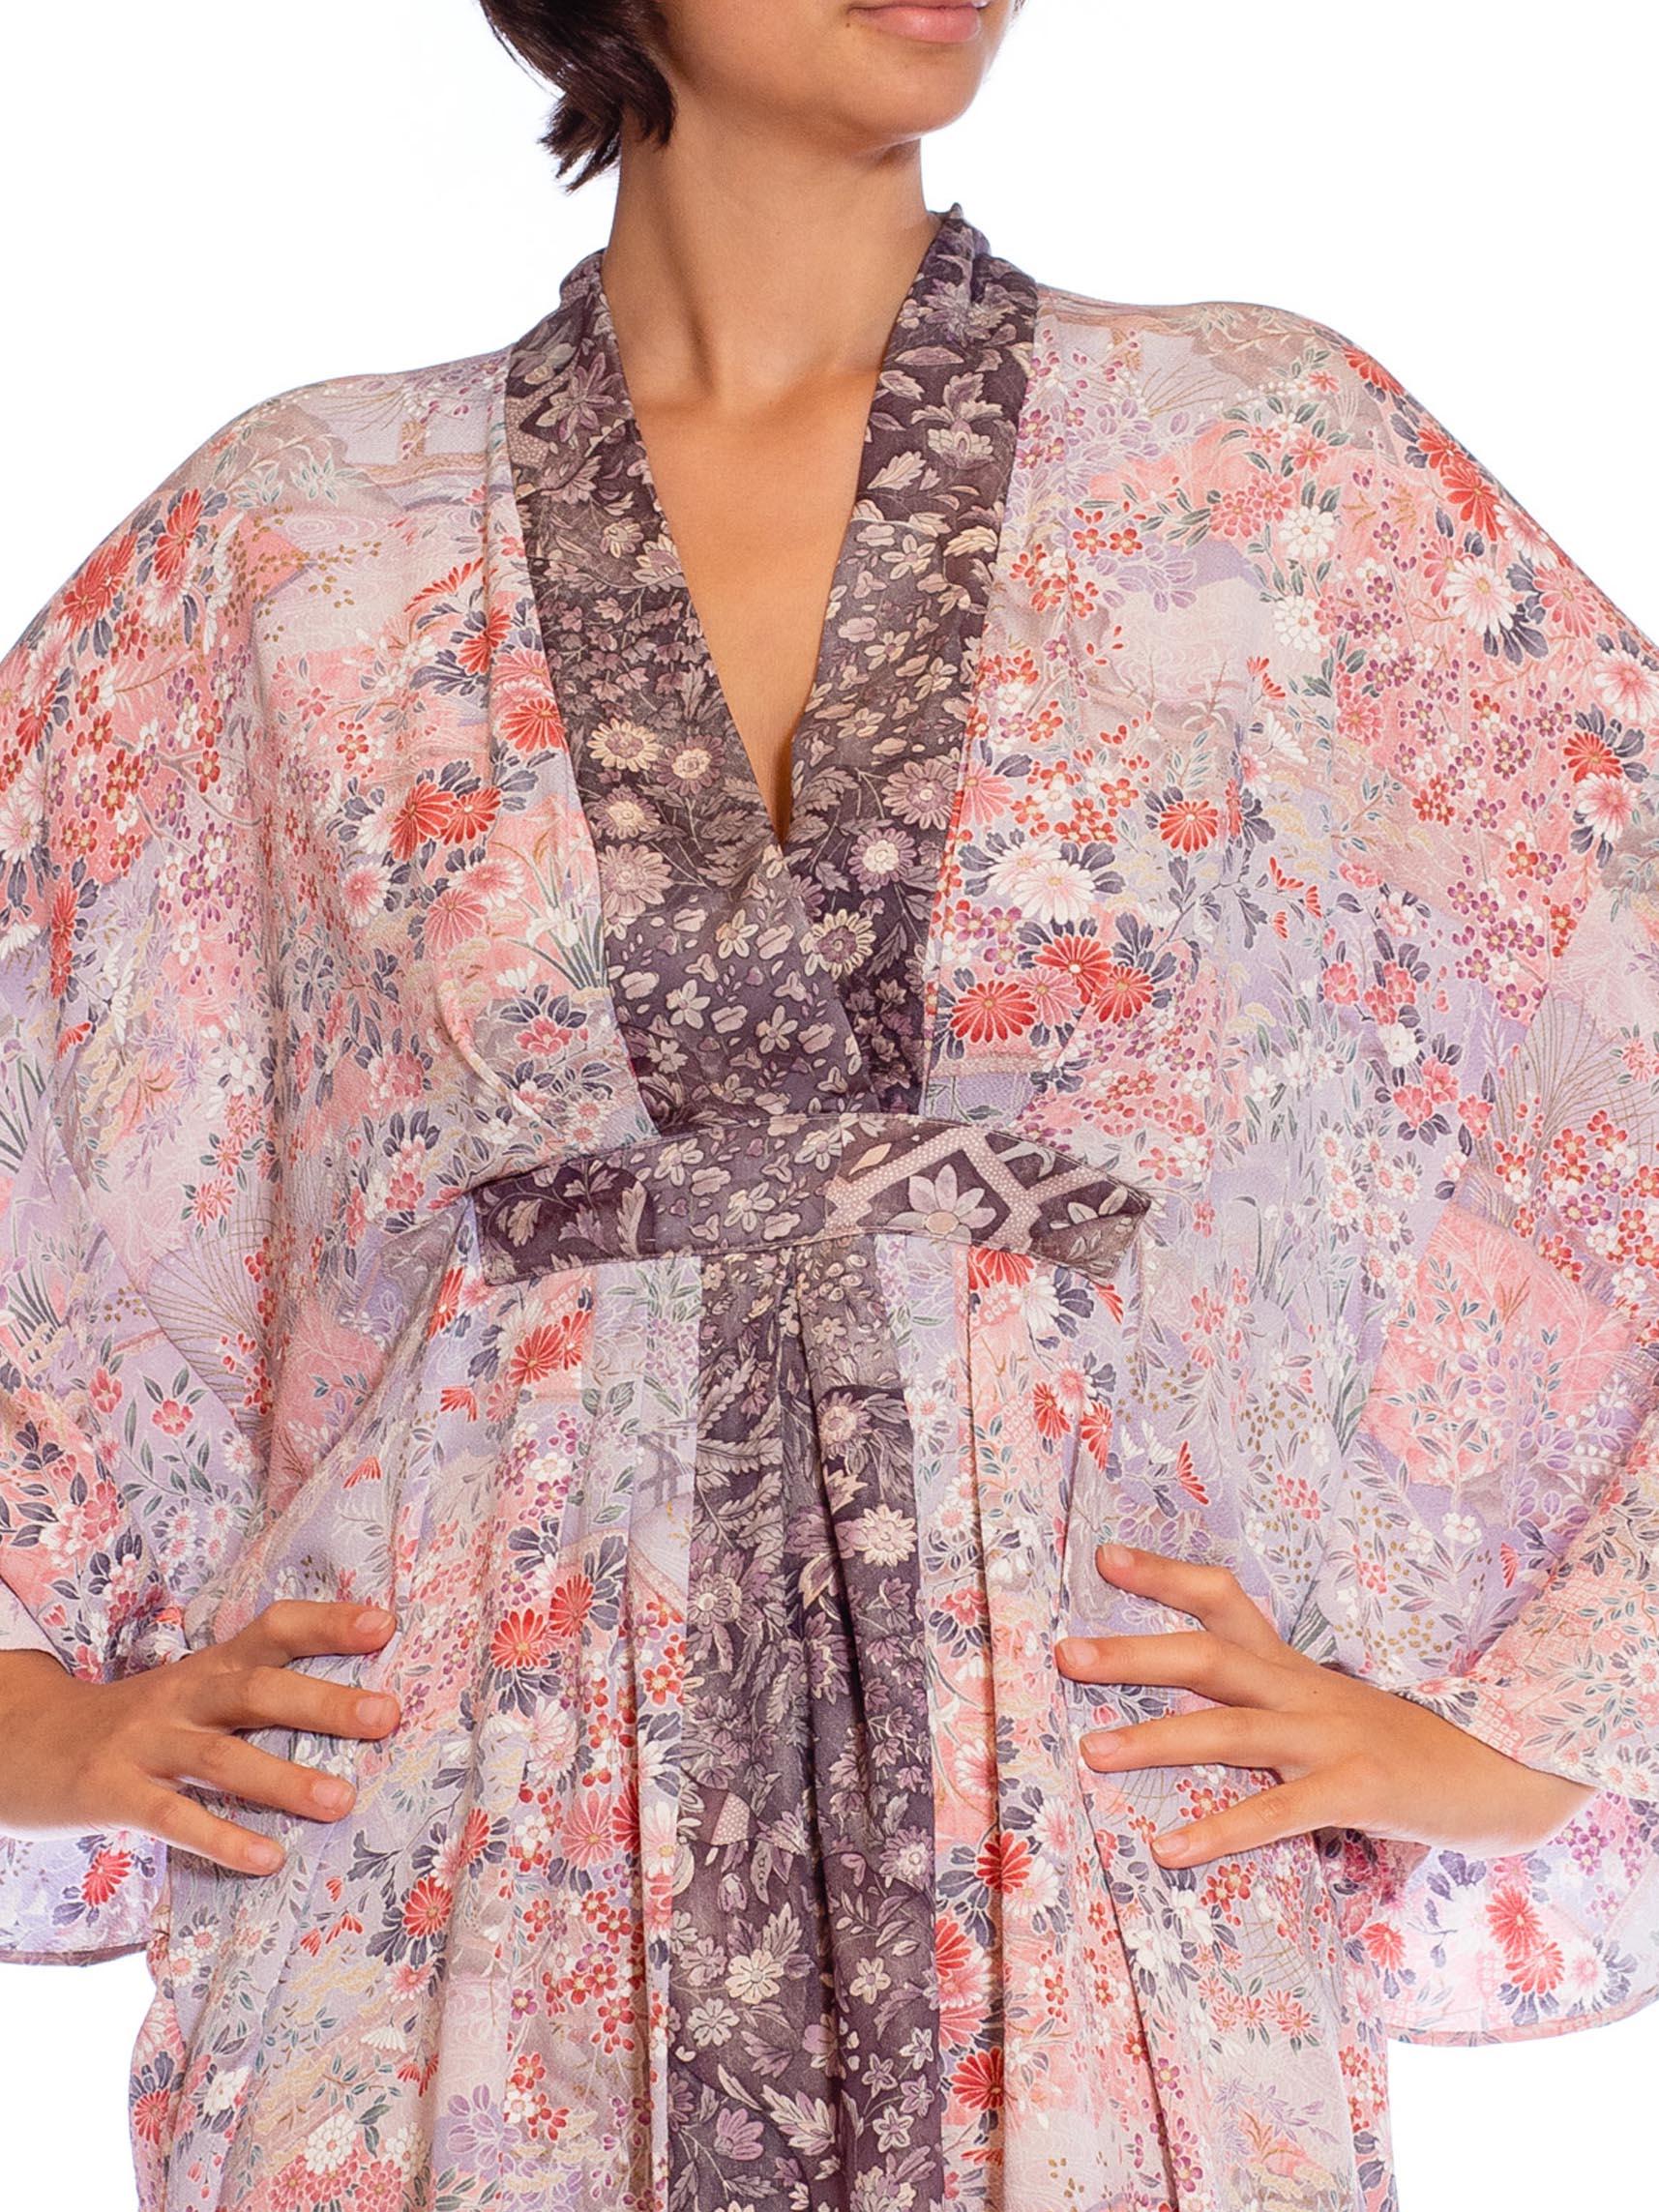 MORPHEW COLLECTION Pink Floral Print Japanese Kimono Silk Violet Detail Kaftan  In Excellent Condition For Sale In New York, NY